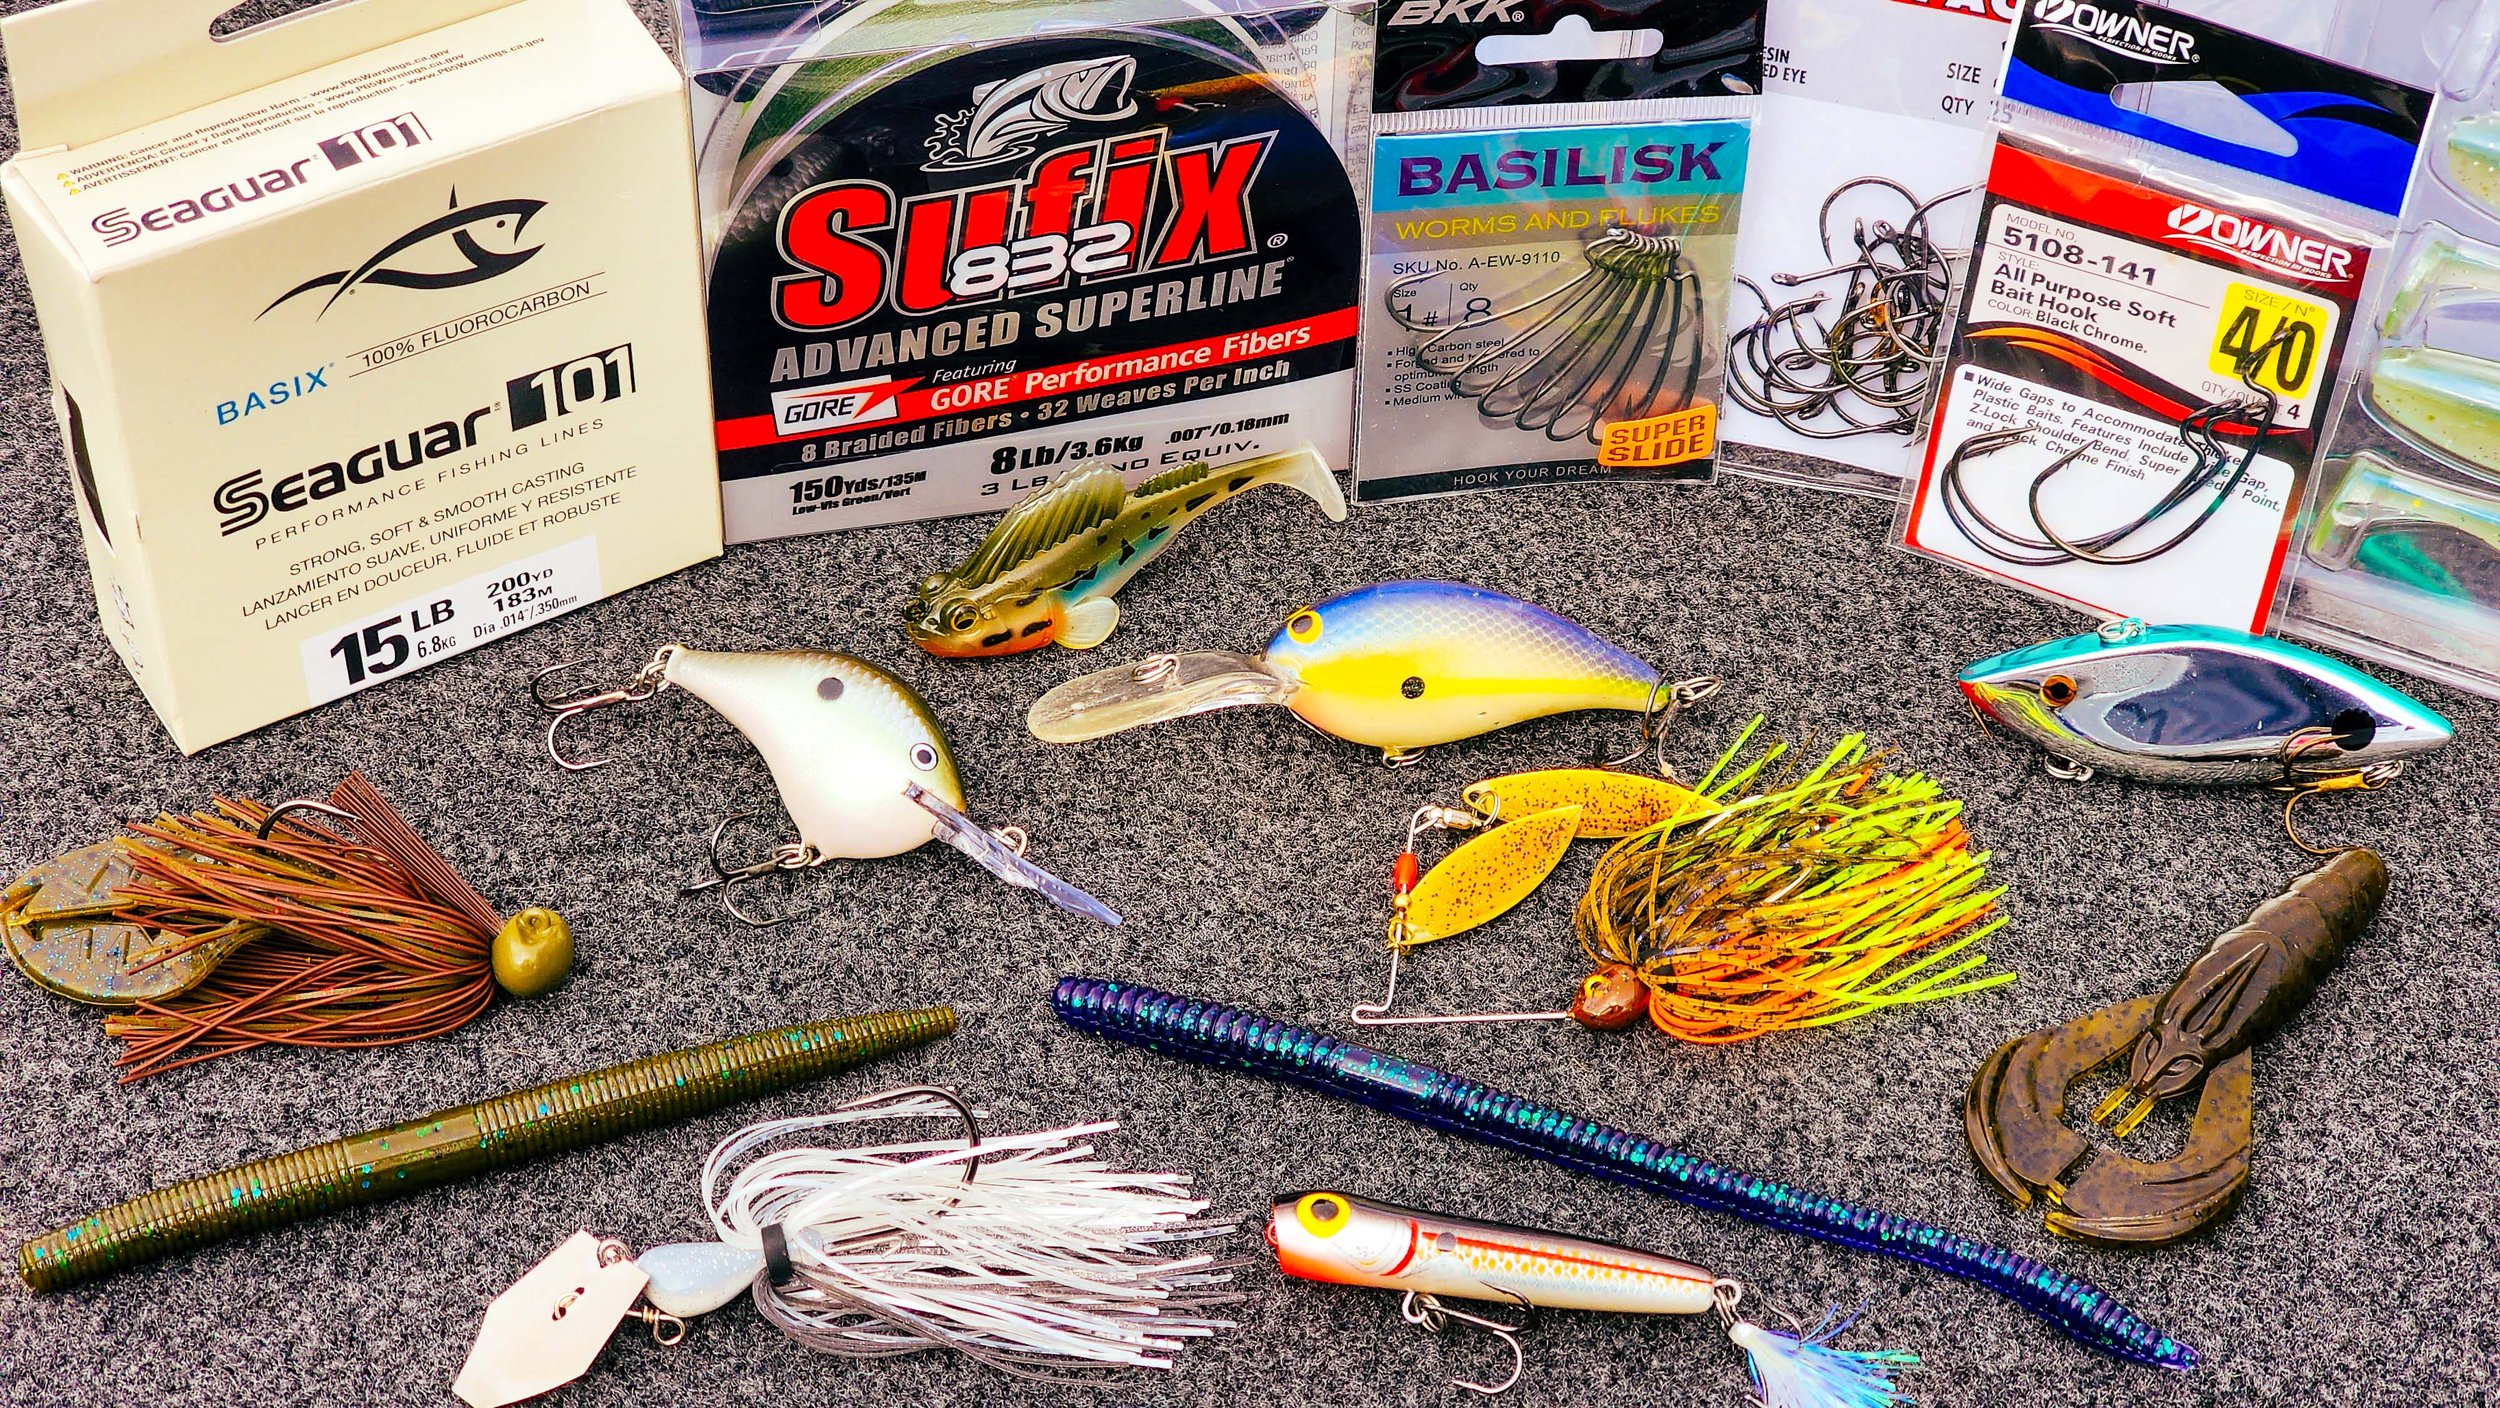 Top 5 Baits For August Bass Fishing! — Tactical Bassin' - Bass Fishing Blog